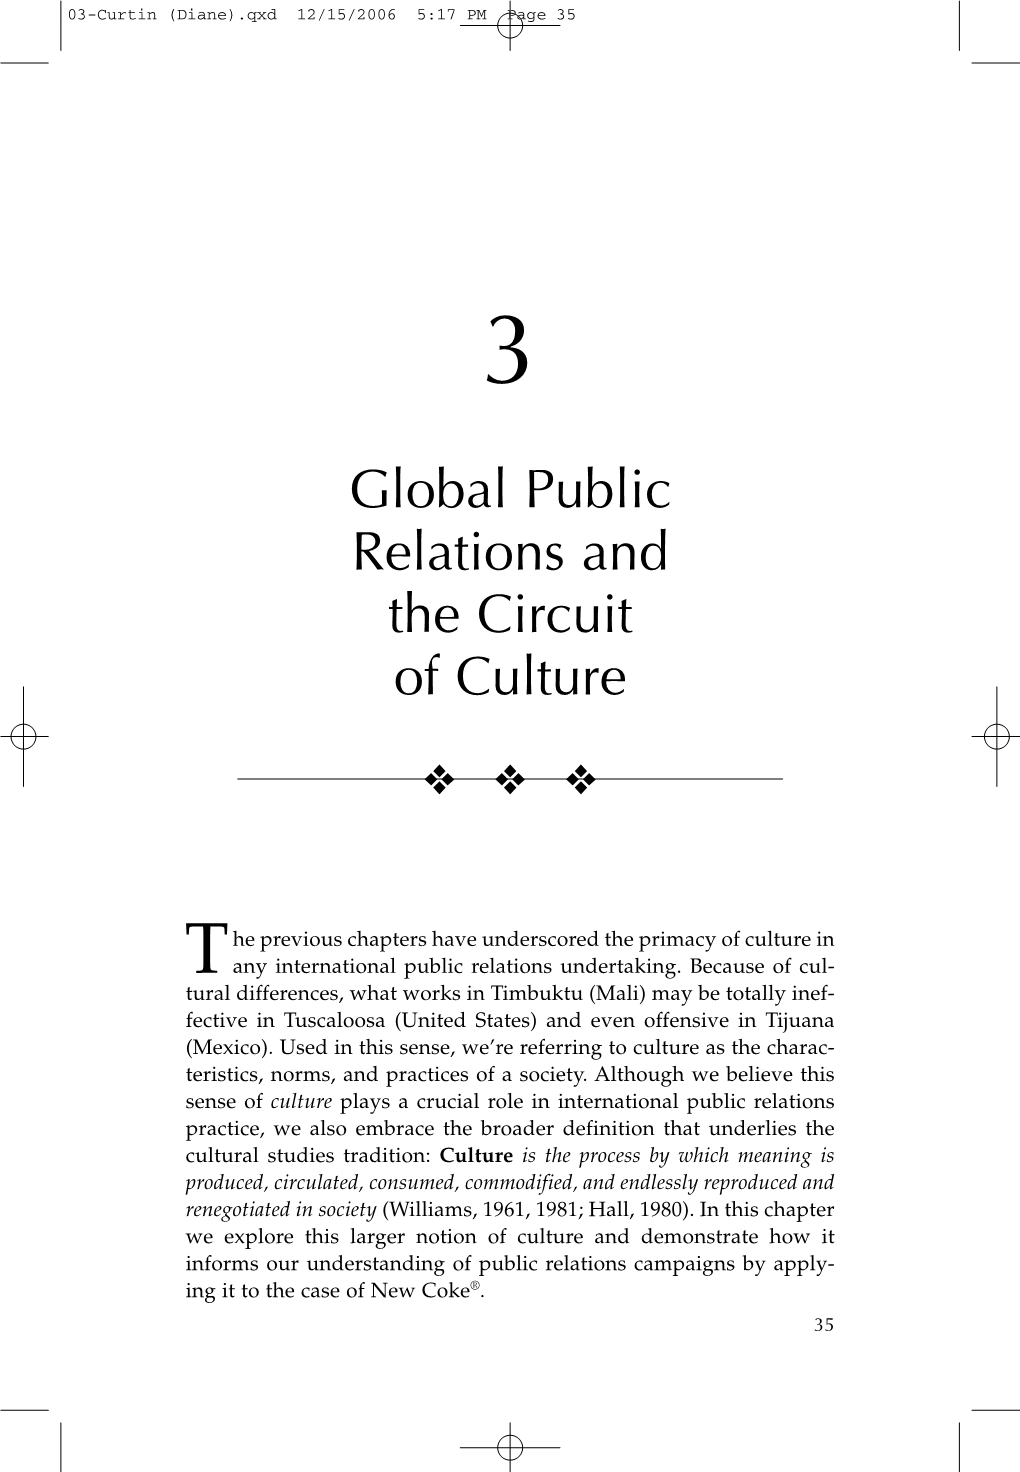 Global Public Relations and the Circuit of Culture